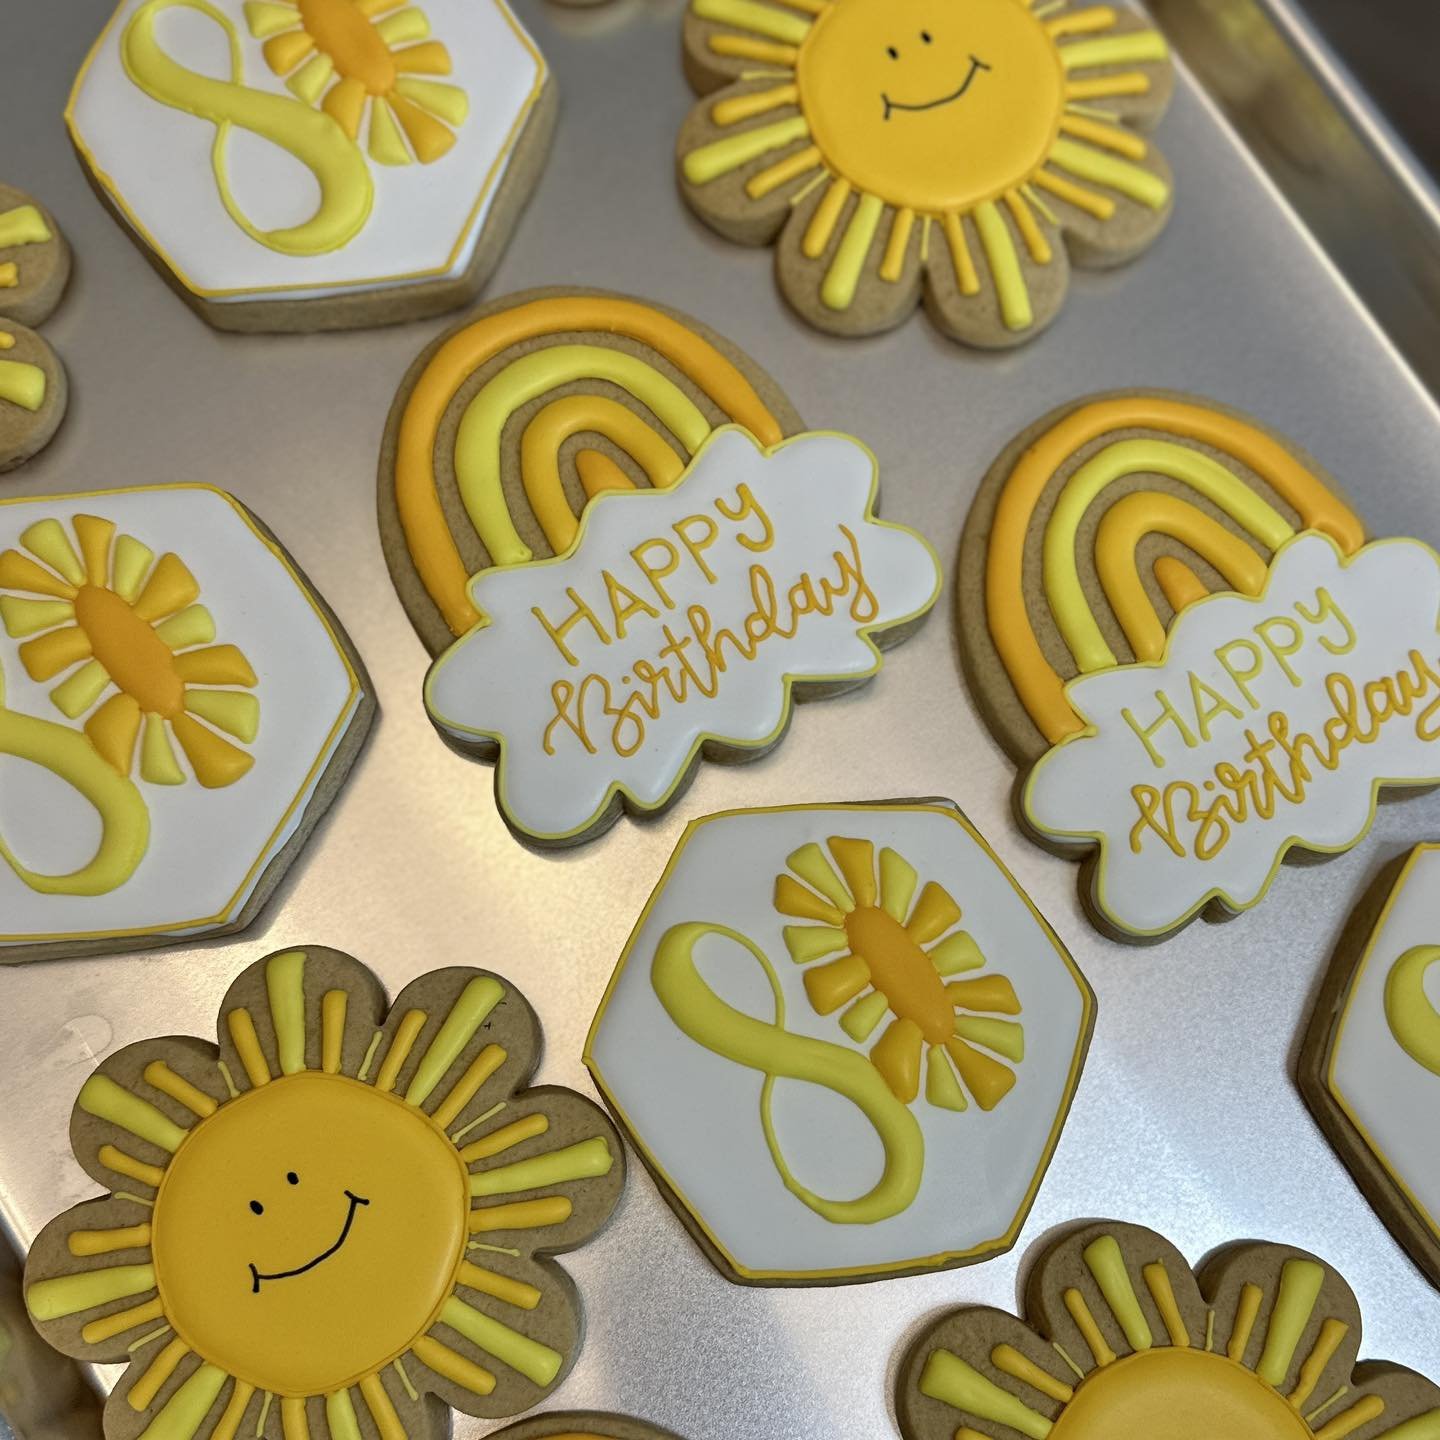 Here is a look at recent order for 80th birthday cookies. What a fun and cheerful theme!  #customcookies #royalicing #cookies #birthdaycookies #80thbirthday